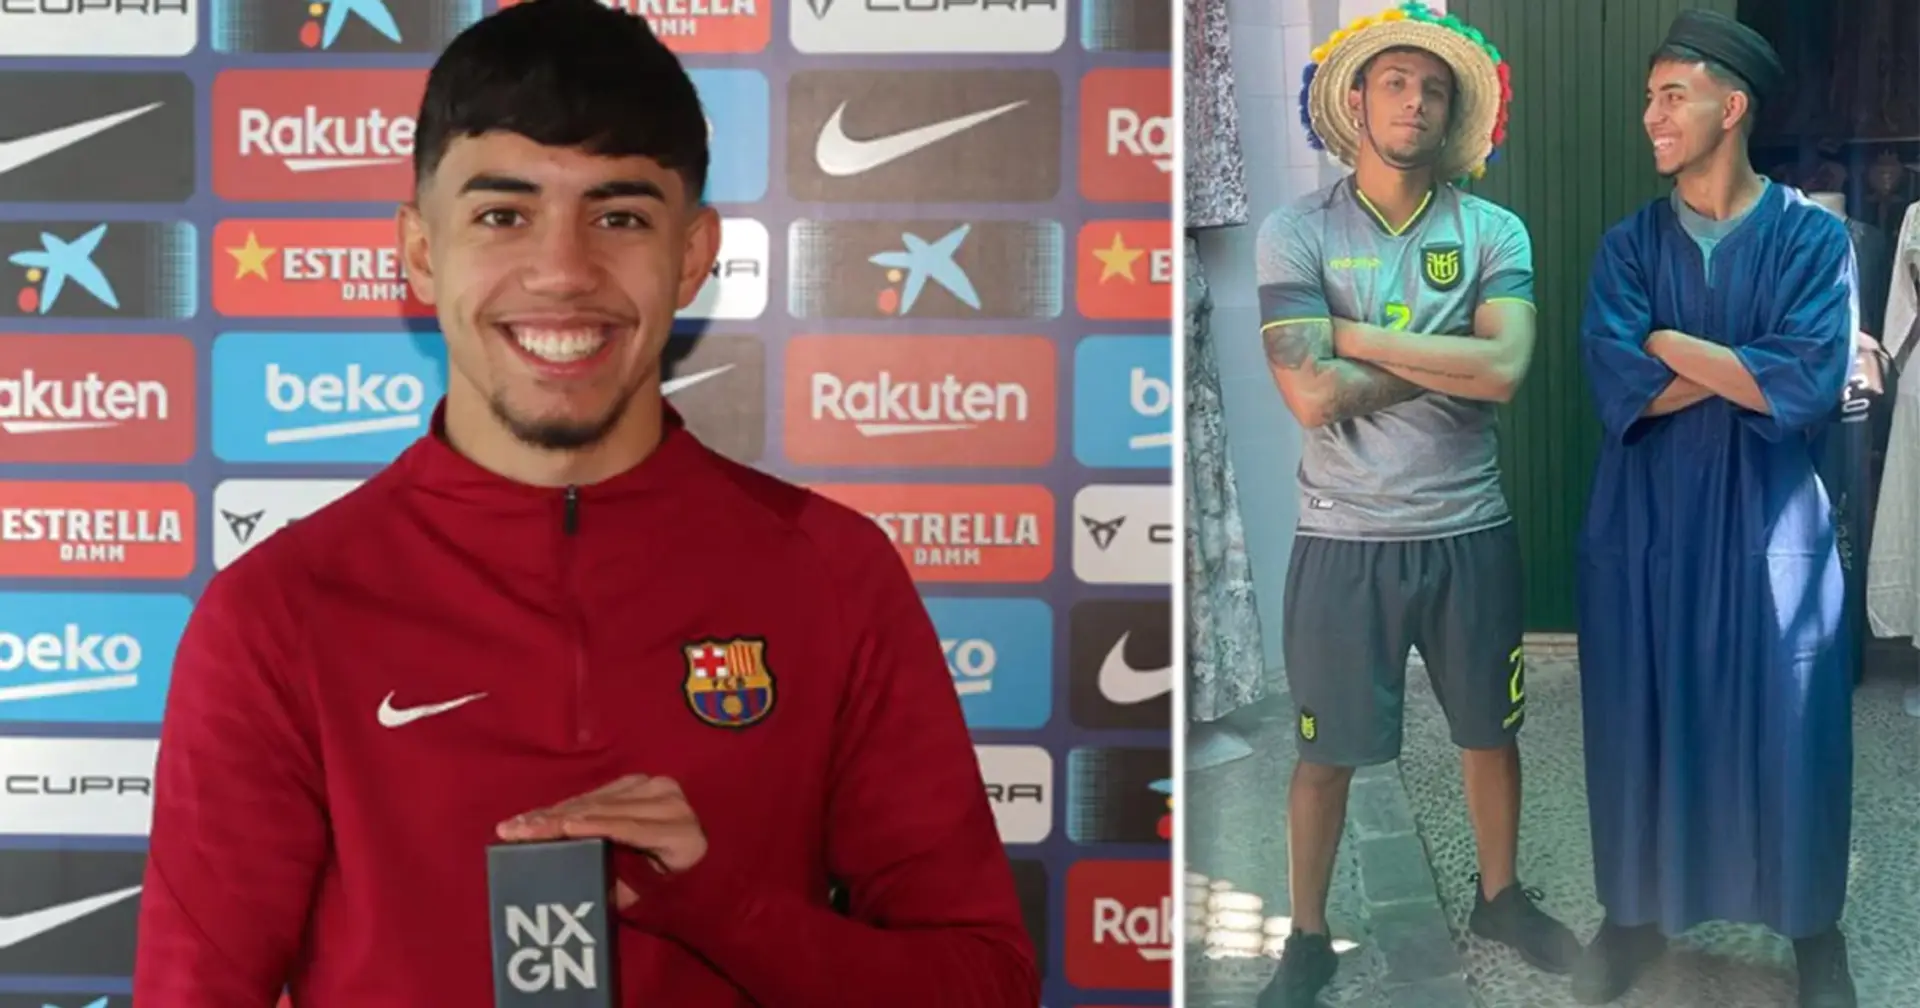 One U19 talent set to do pre-season with first team – Xavi bet on him in first game as Barca coach